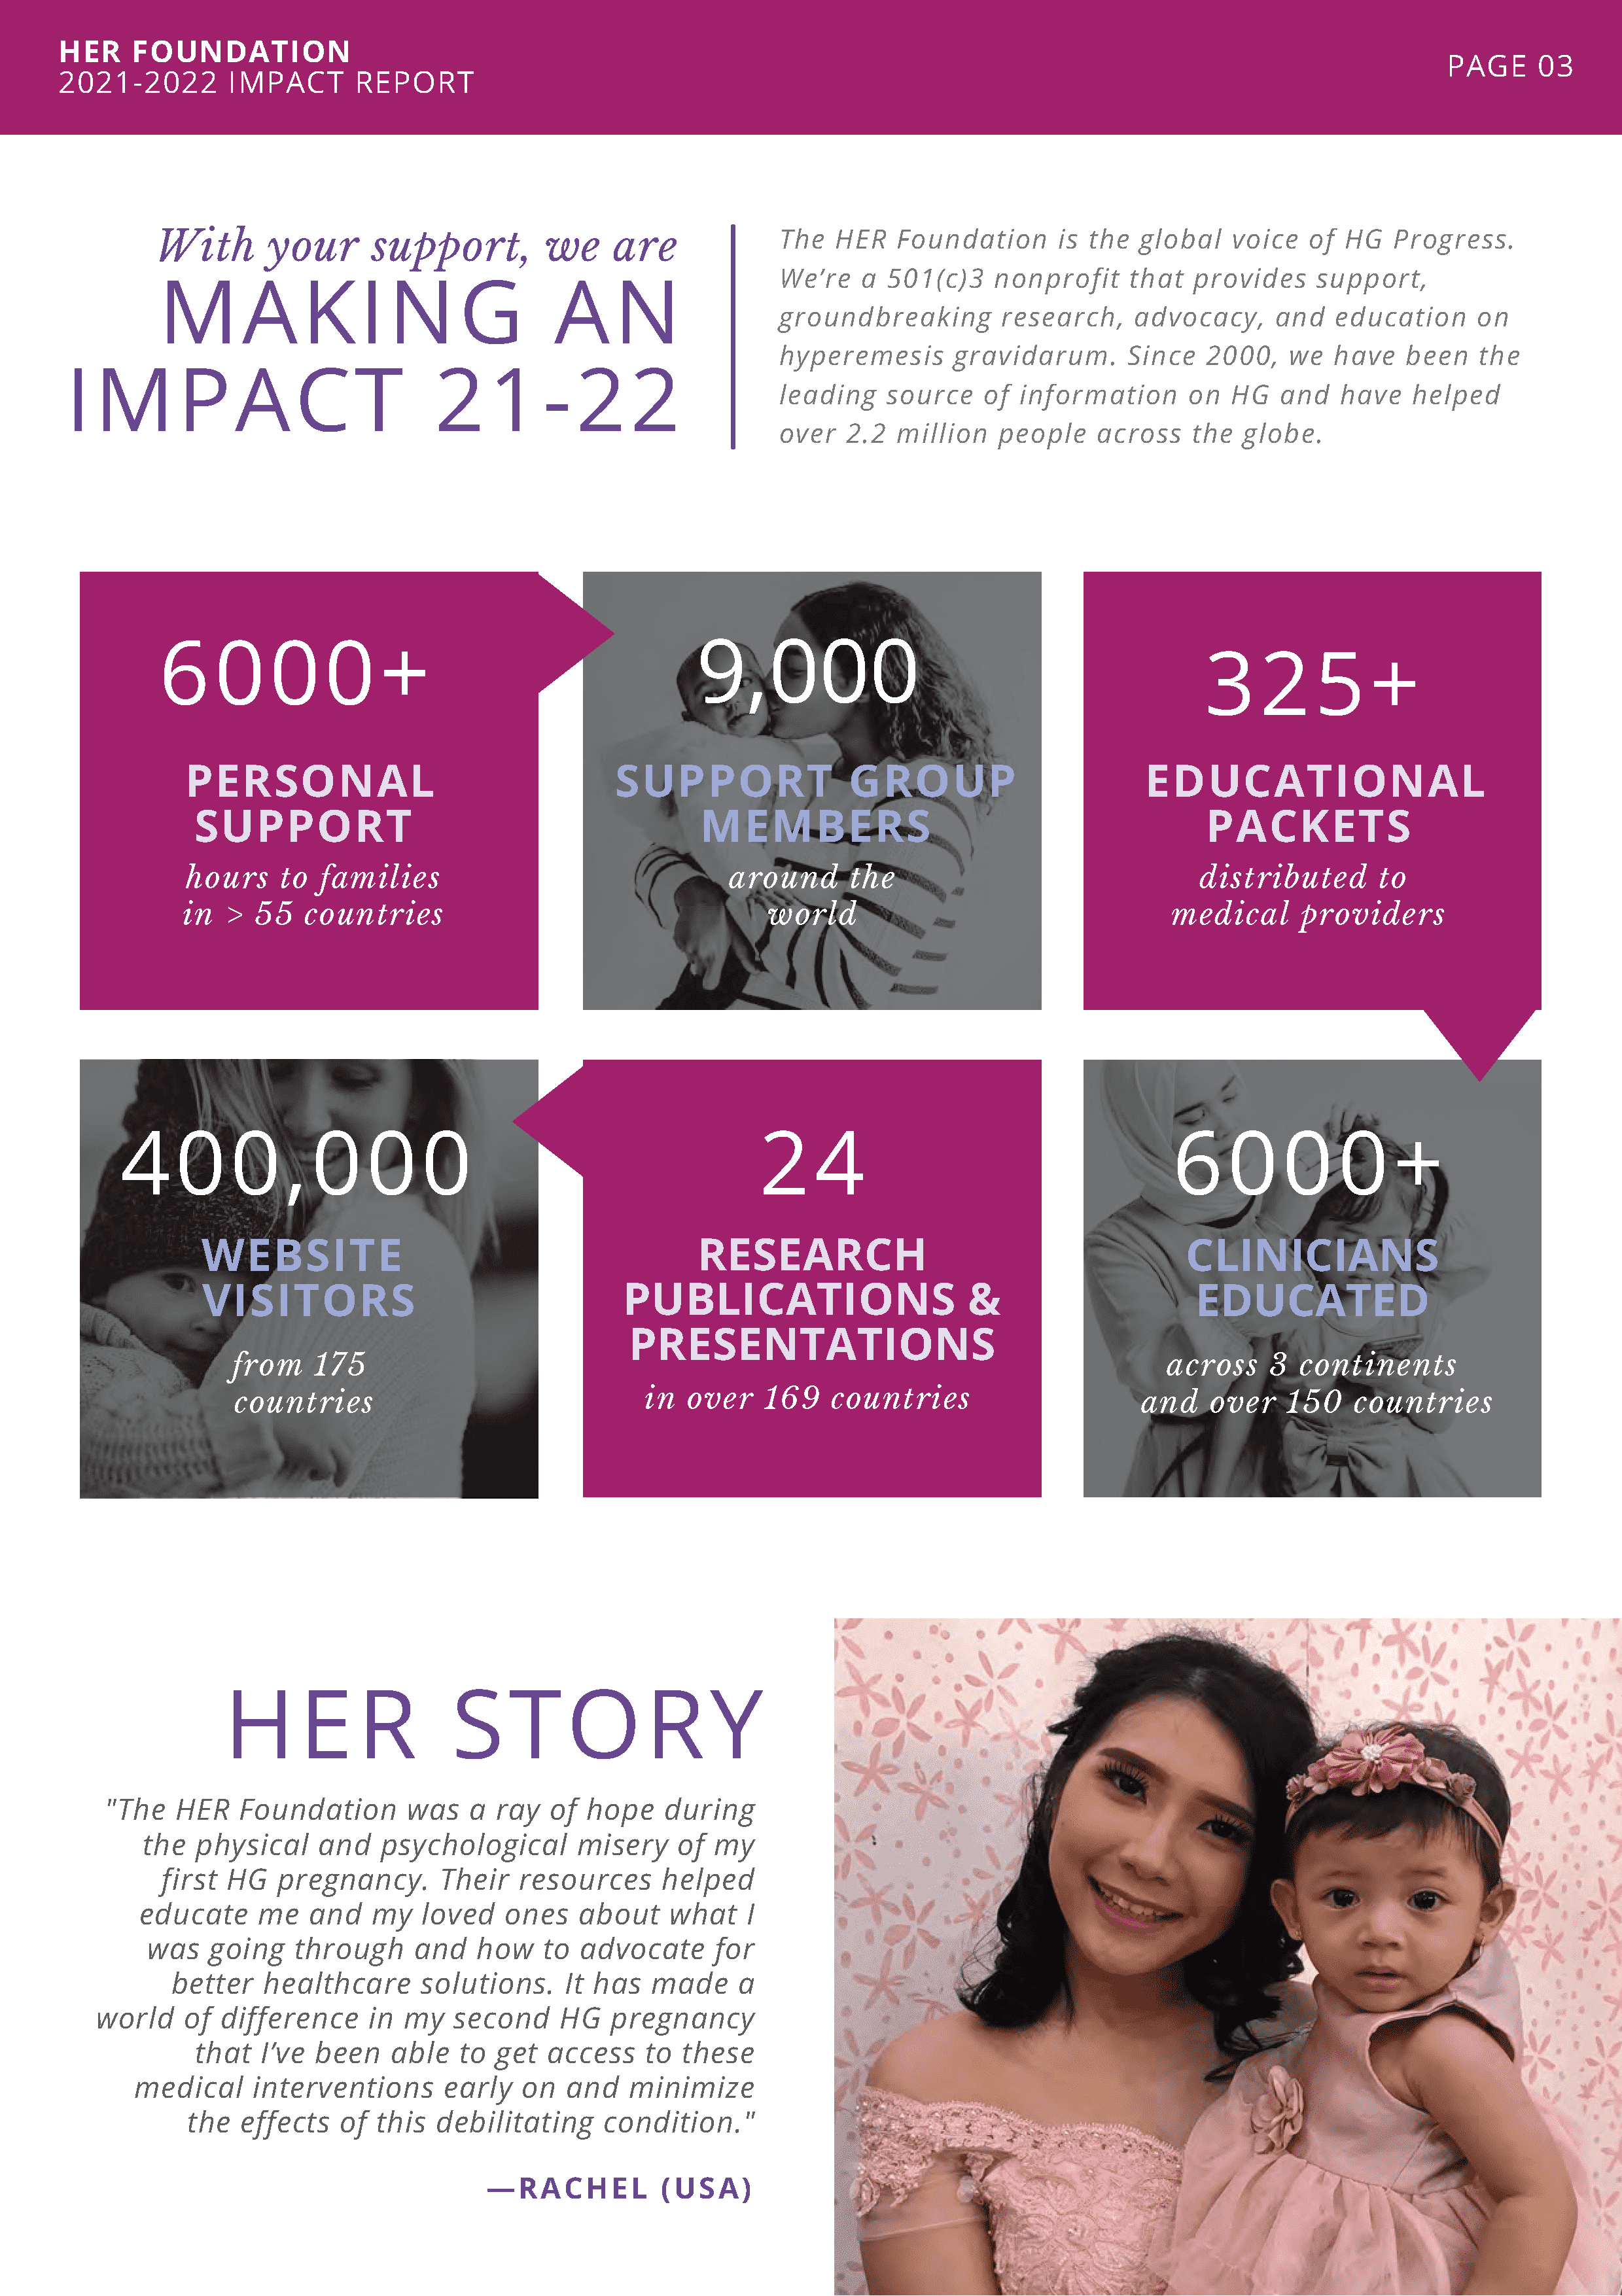 HER-2021-2022-IMPACT-REPORT-PDF-Final-Cmp_Page_05-min